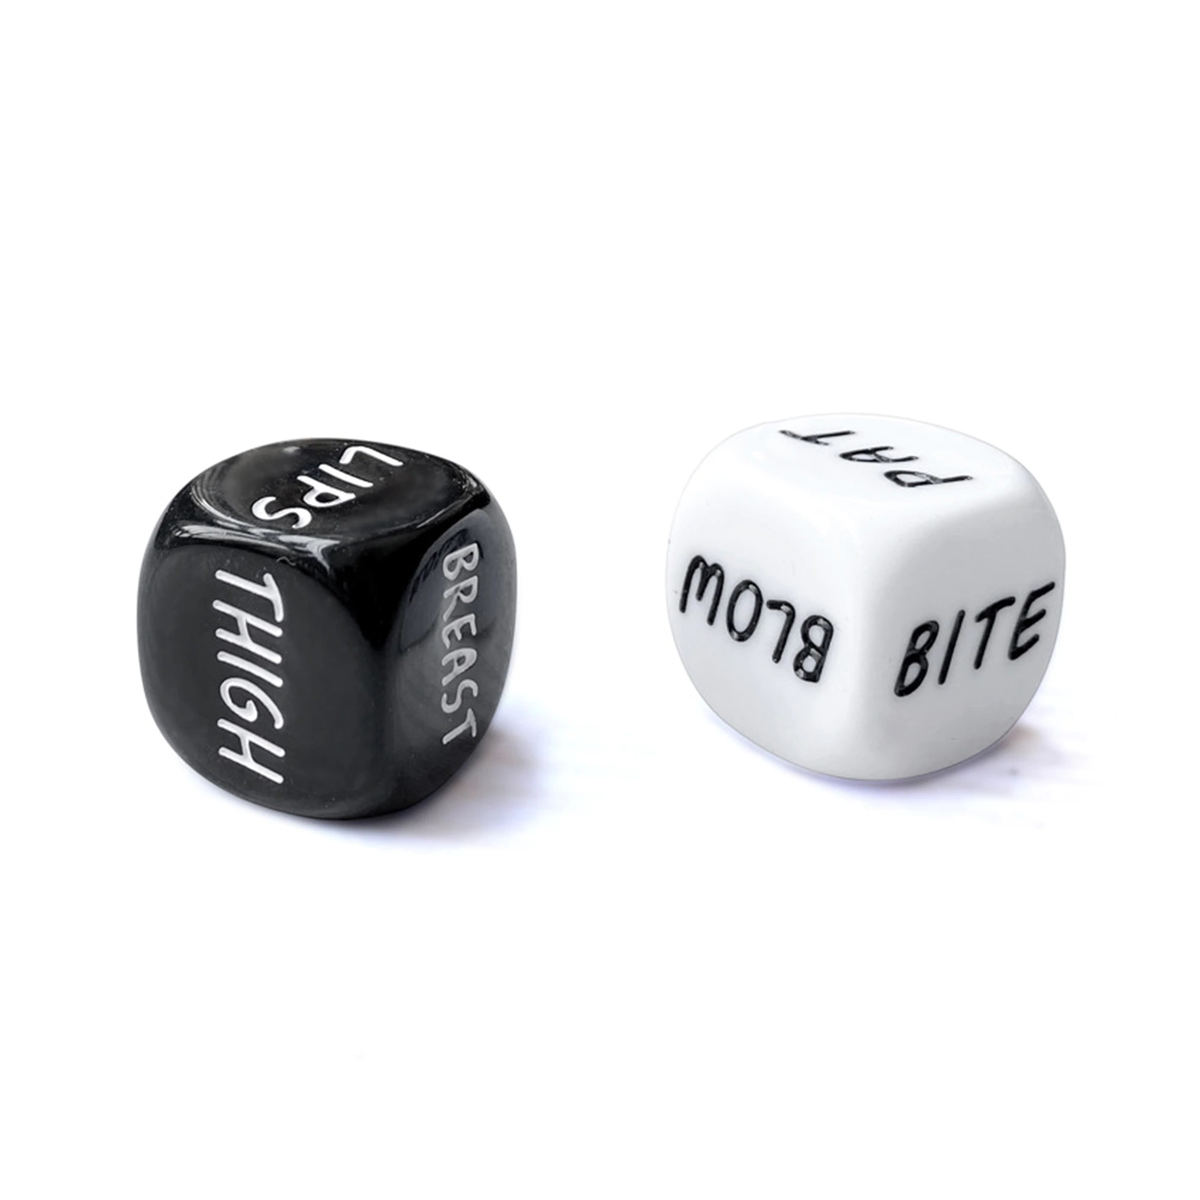 Fun Erotic Adult Games / Luminous Toy Dices for Couples / Tabletop Sex Games - EVE's SECRETS